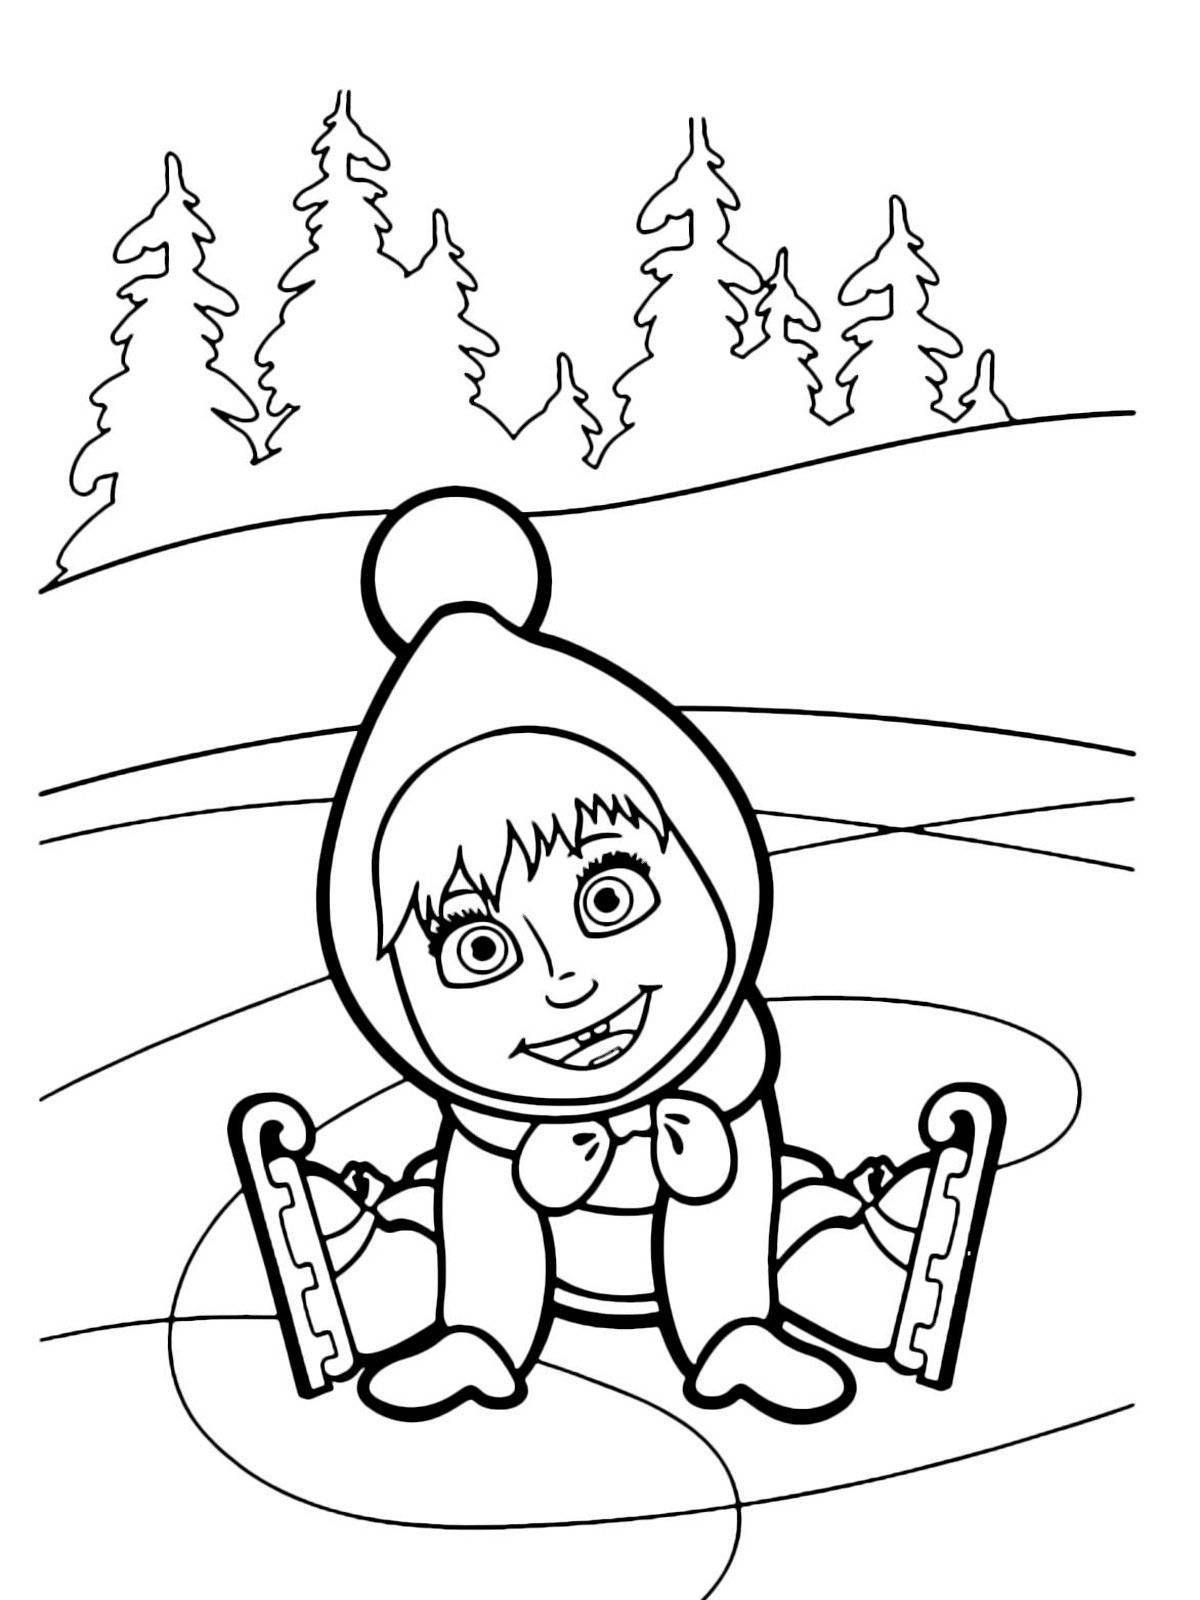 Merry Masha and the bear deluxe coloring book